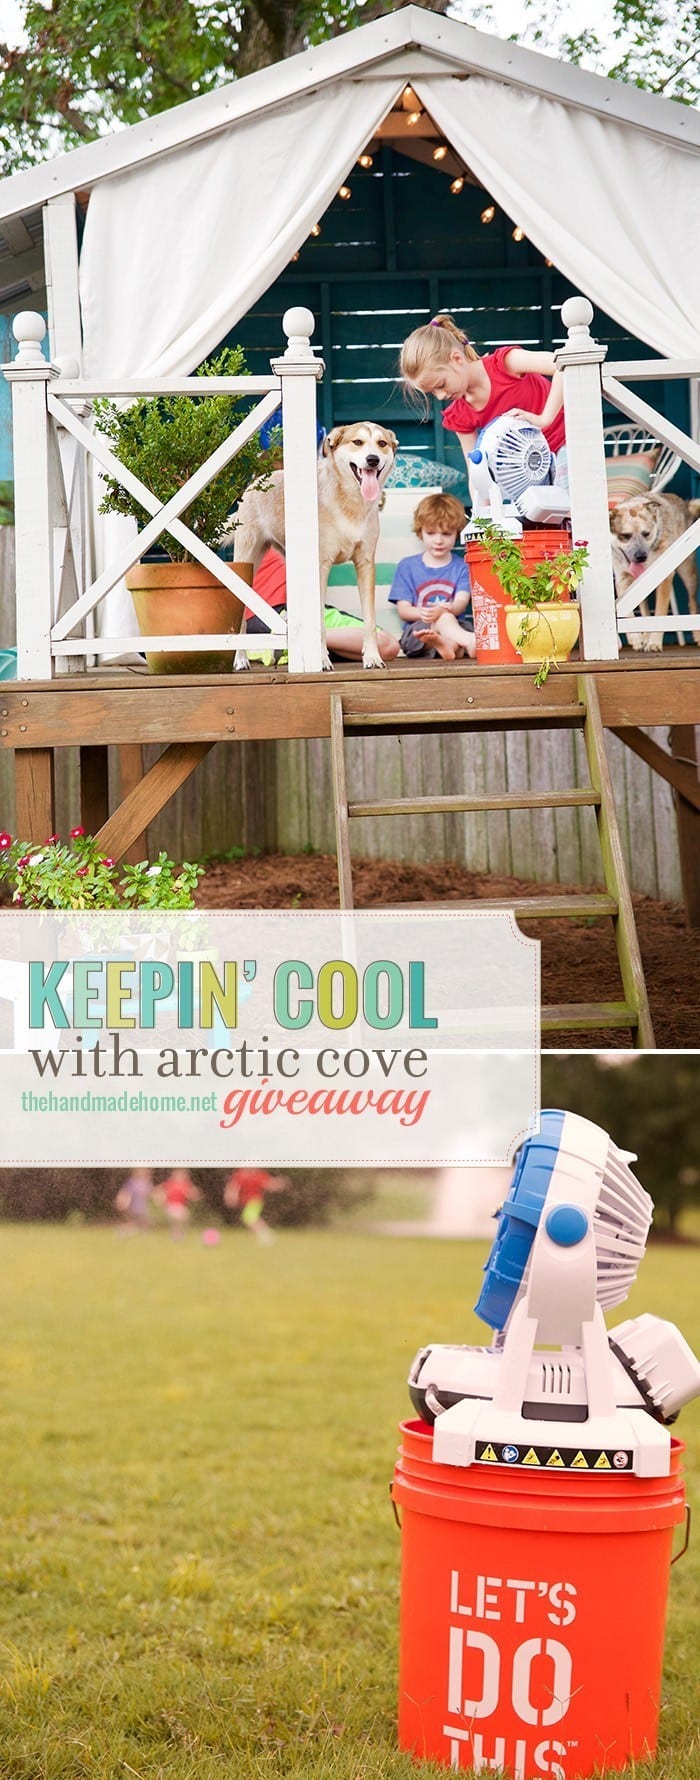 keepin_cool_with_arctic_cove